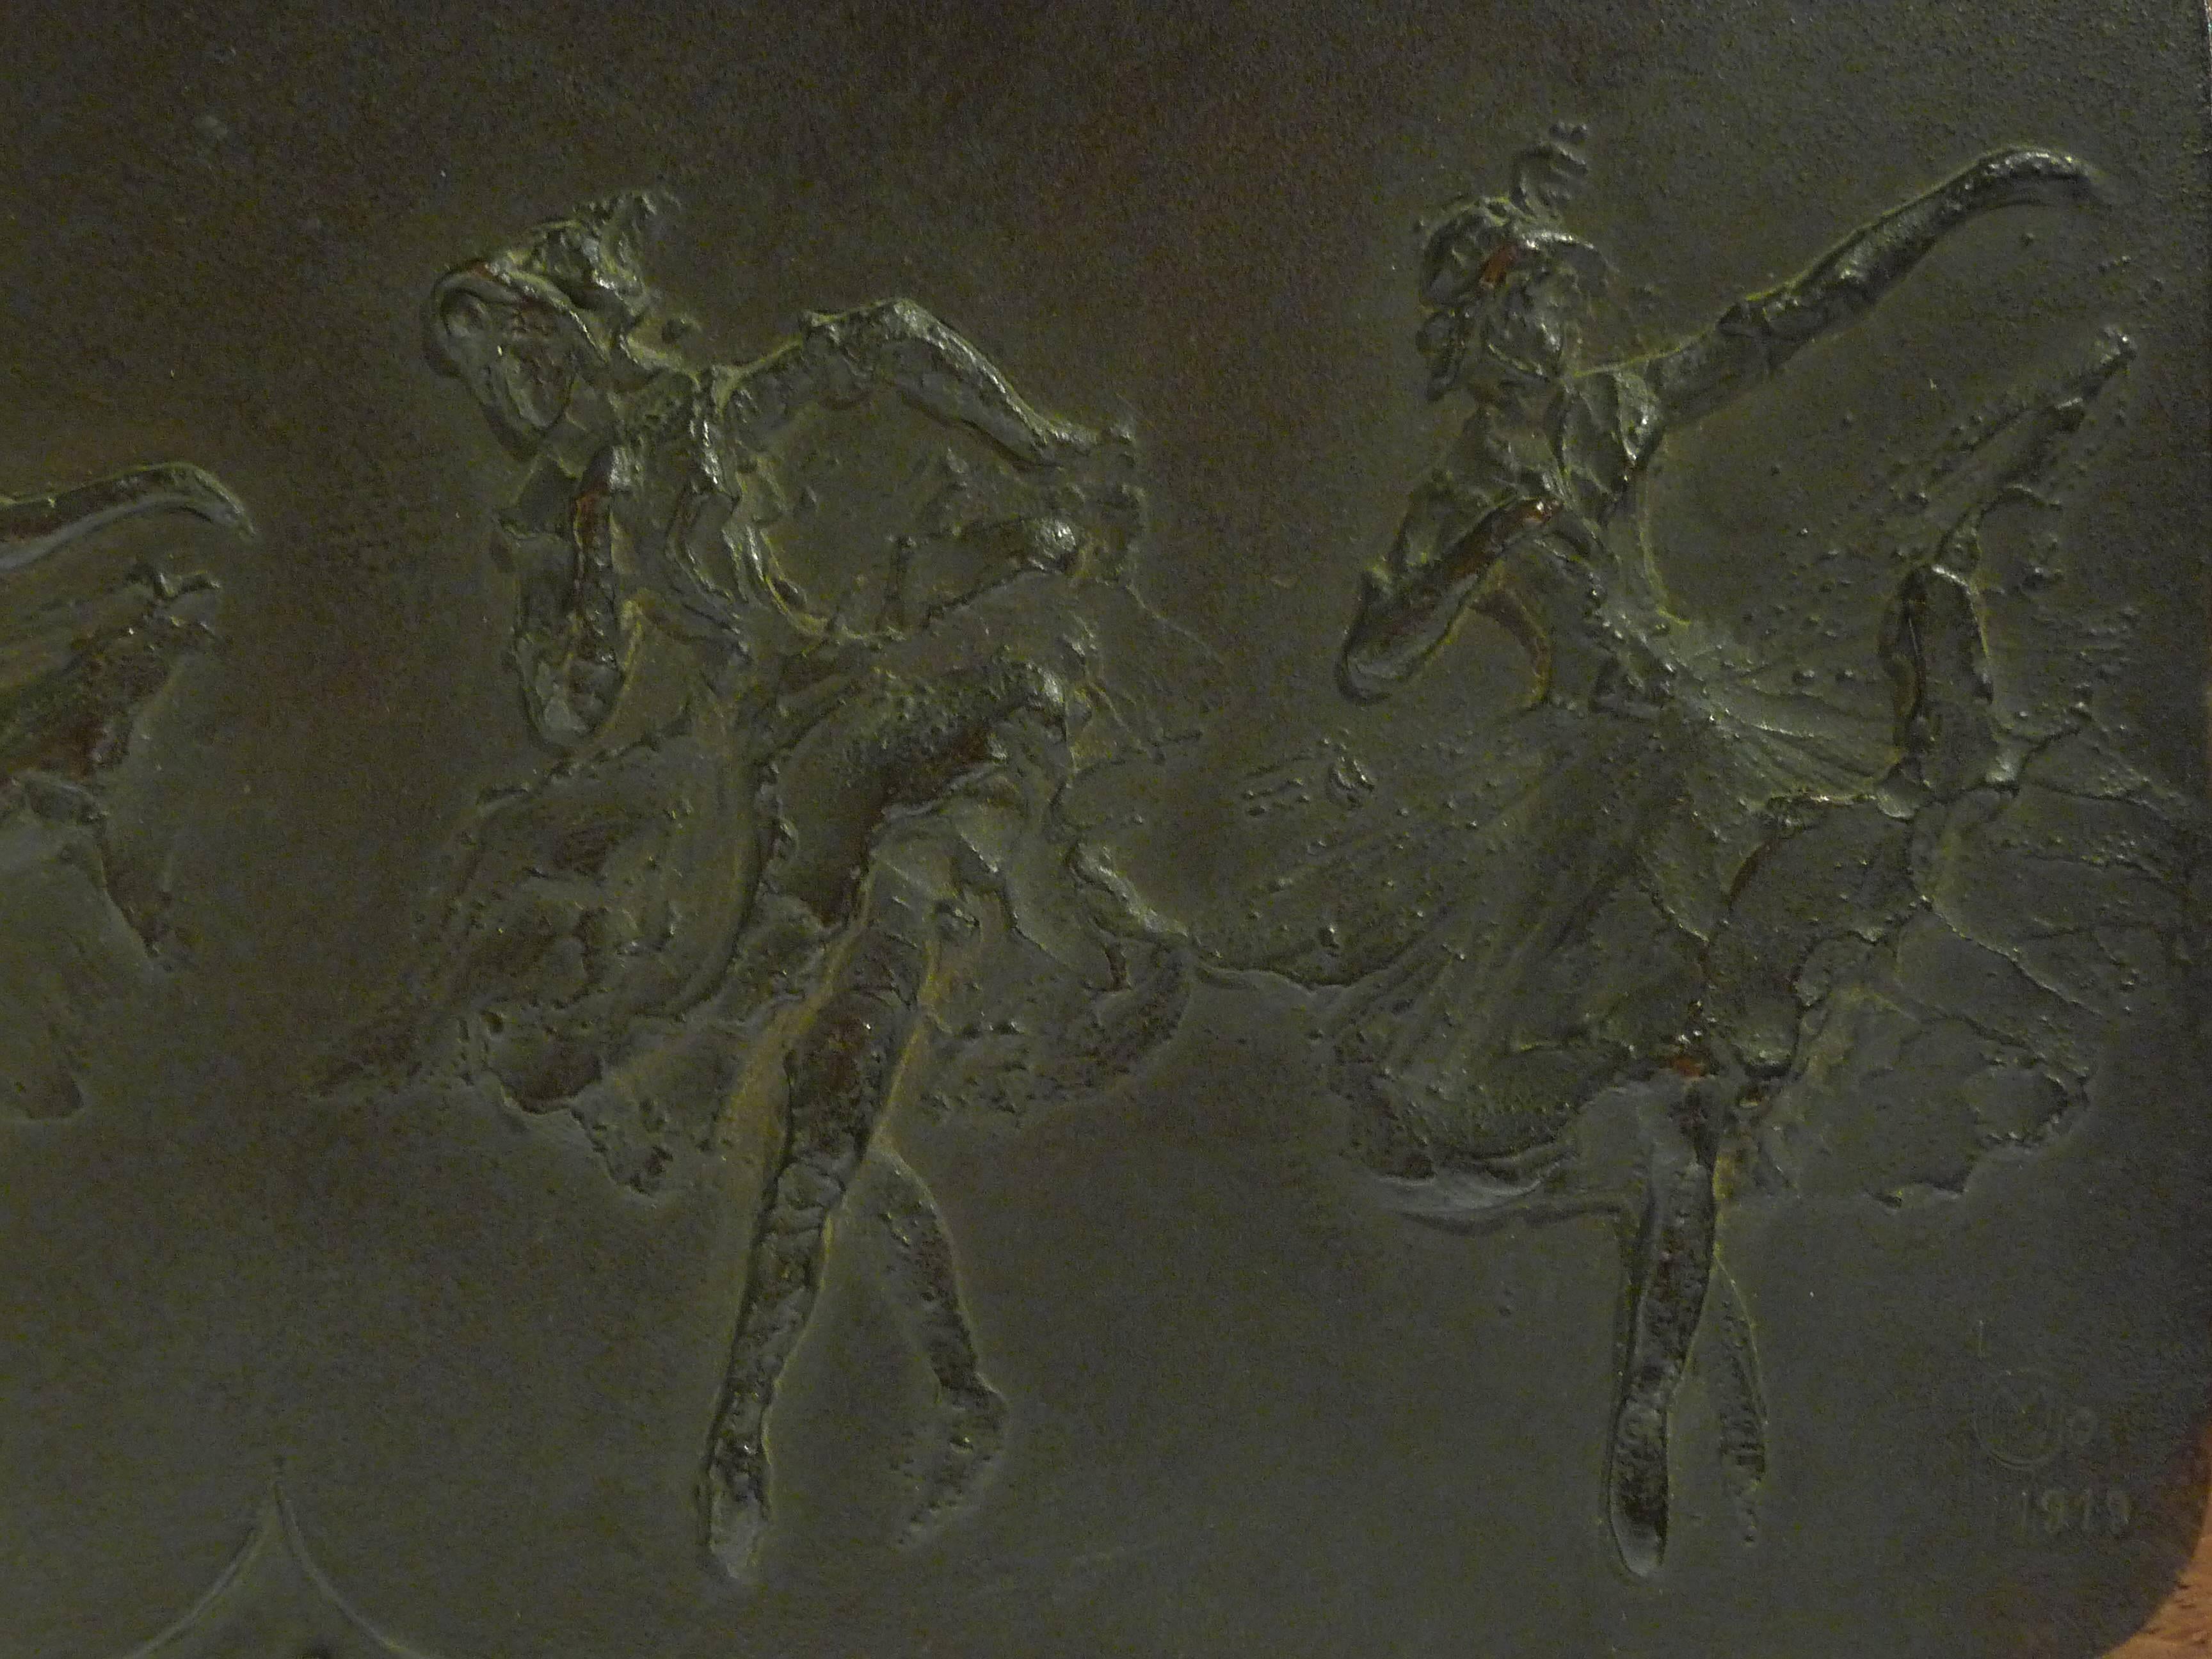 Maurice Charpentier-Mio.
A bronze bas-relief featuring five poses of the dancer Anna Pavlova in Rondino.
Bearing the monogram of the artist, dated "1919" and numbered "1."
Bearing a label at the back: "Croquis de gestes